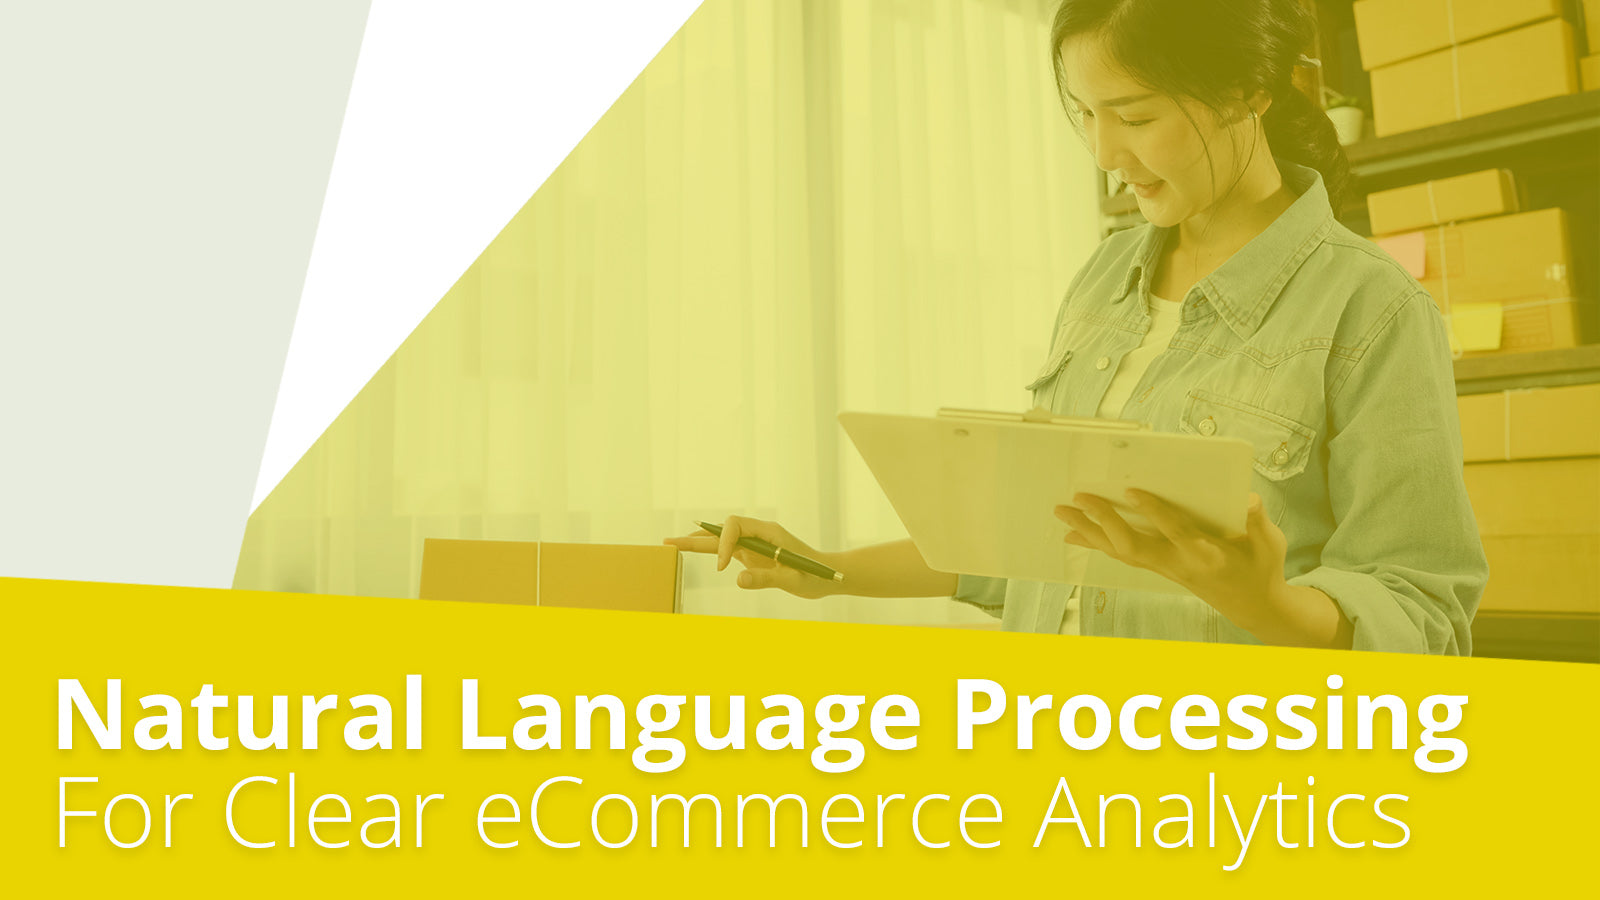 How to Use Natural Language Processing Analytics for Ecommerce